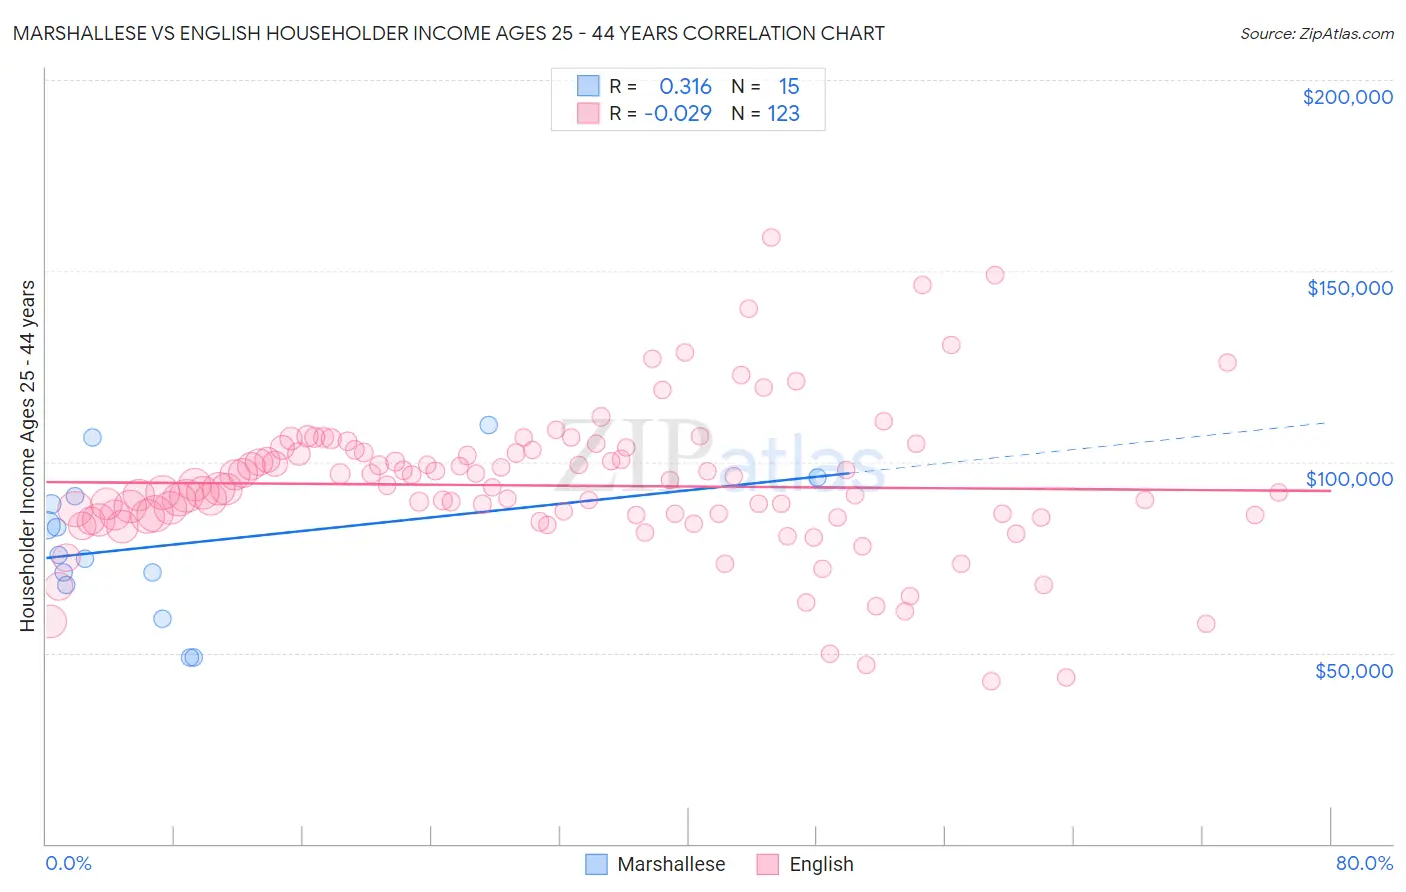 Marshallese vs English Householder Income Ages 25 - 44 years